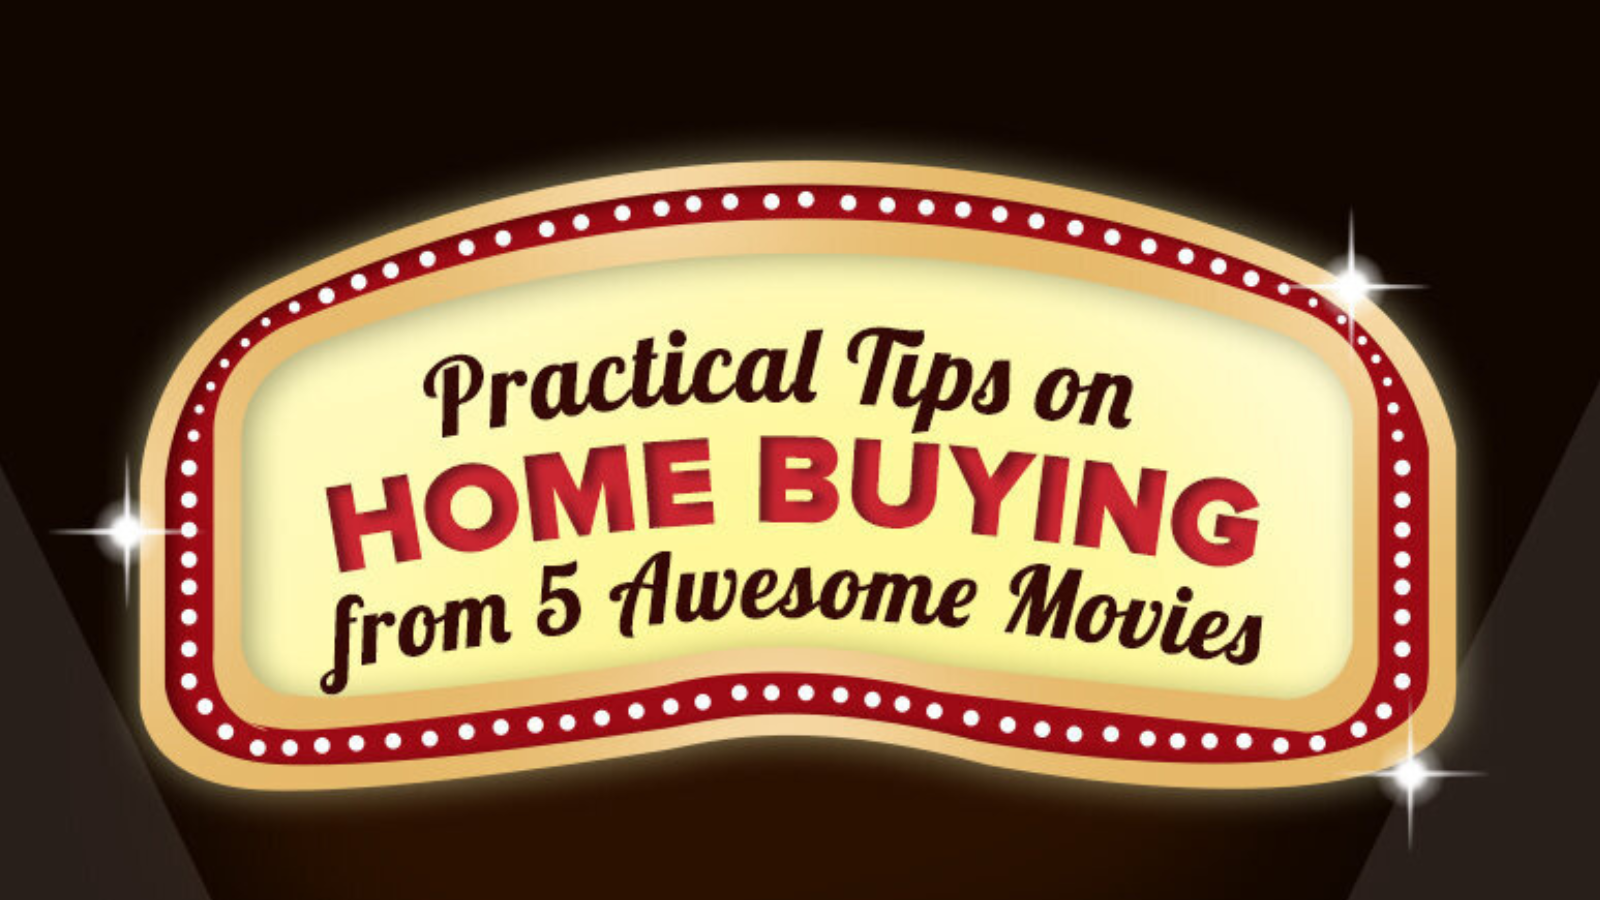 Practical Tips on Home Buying from 5 Awesome Movies